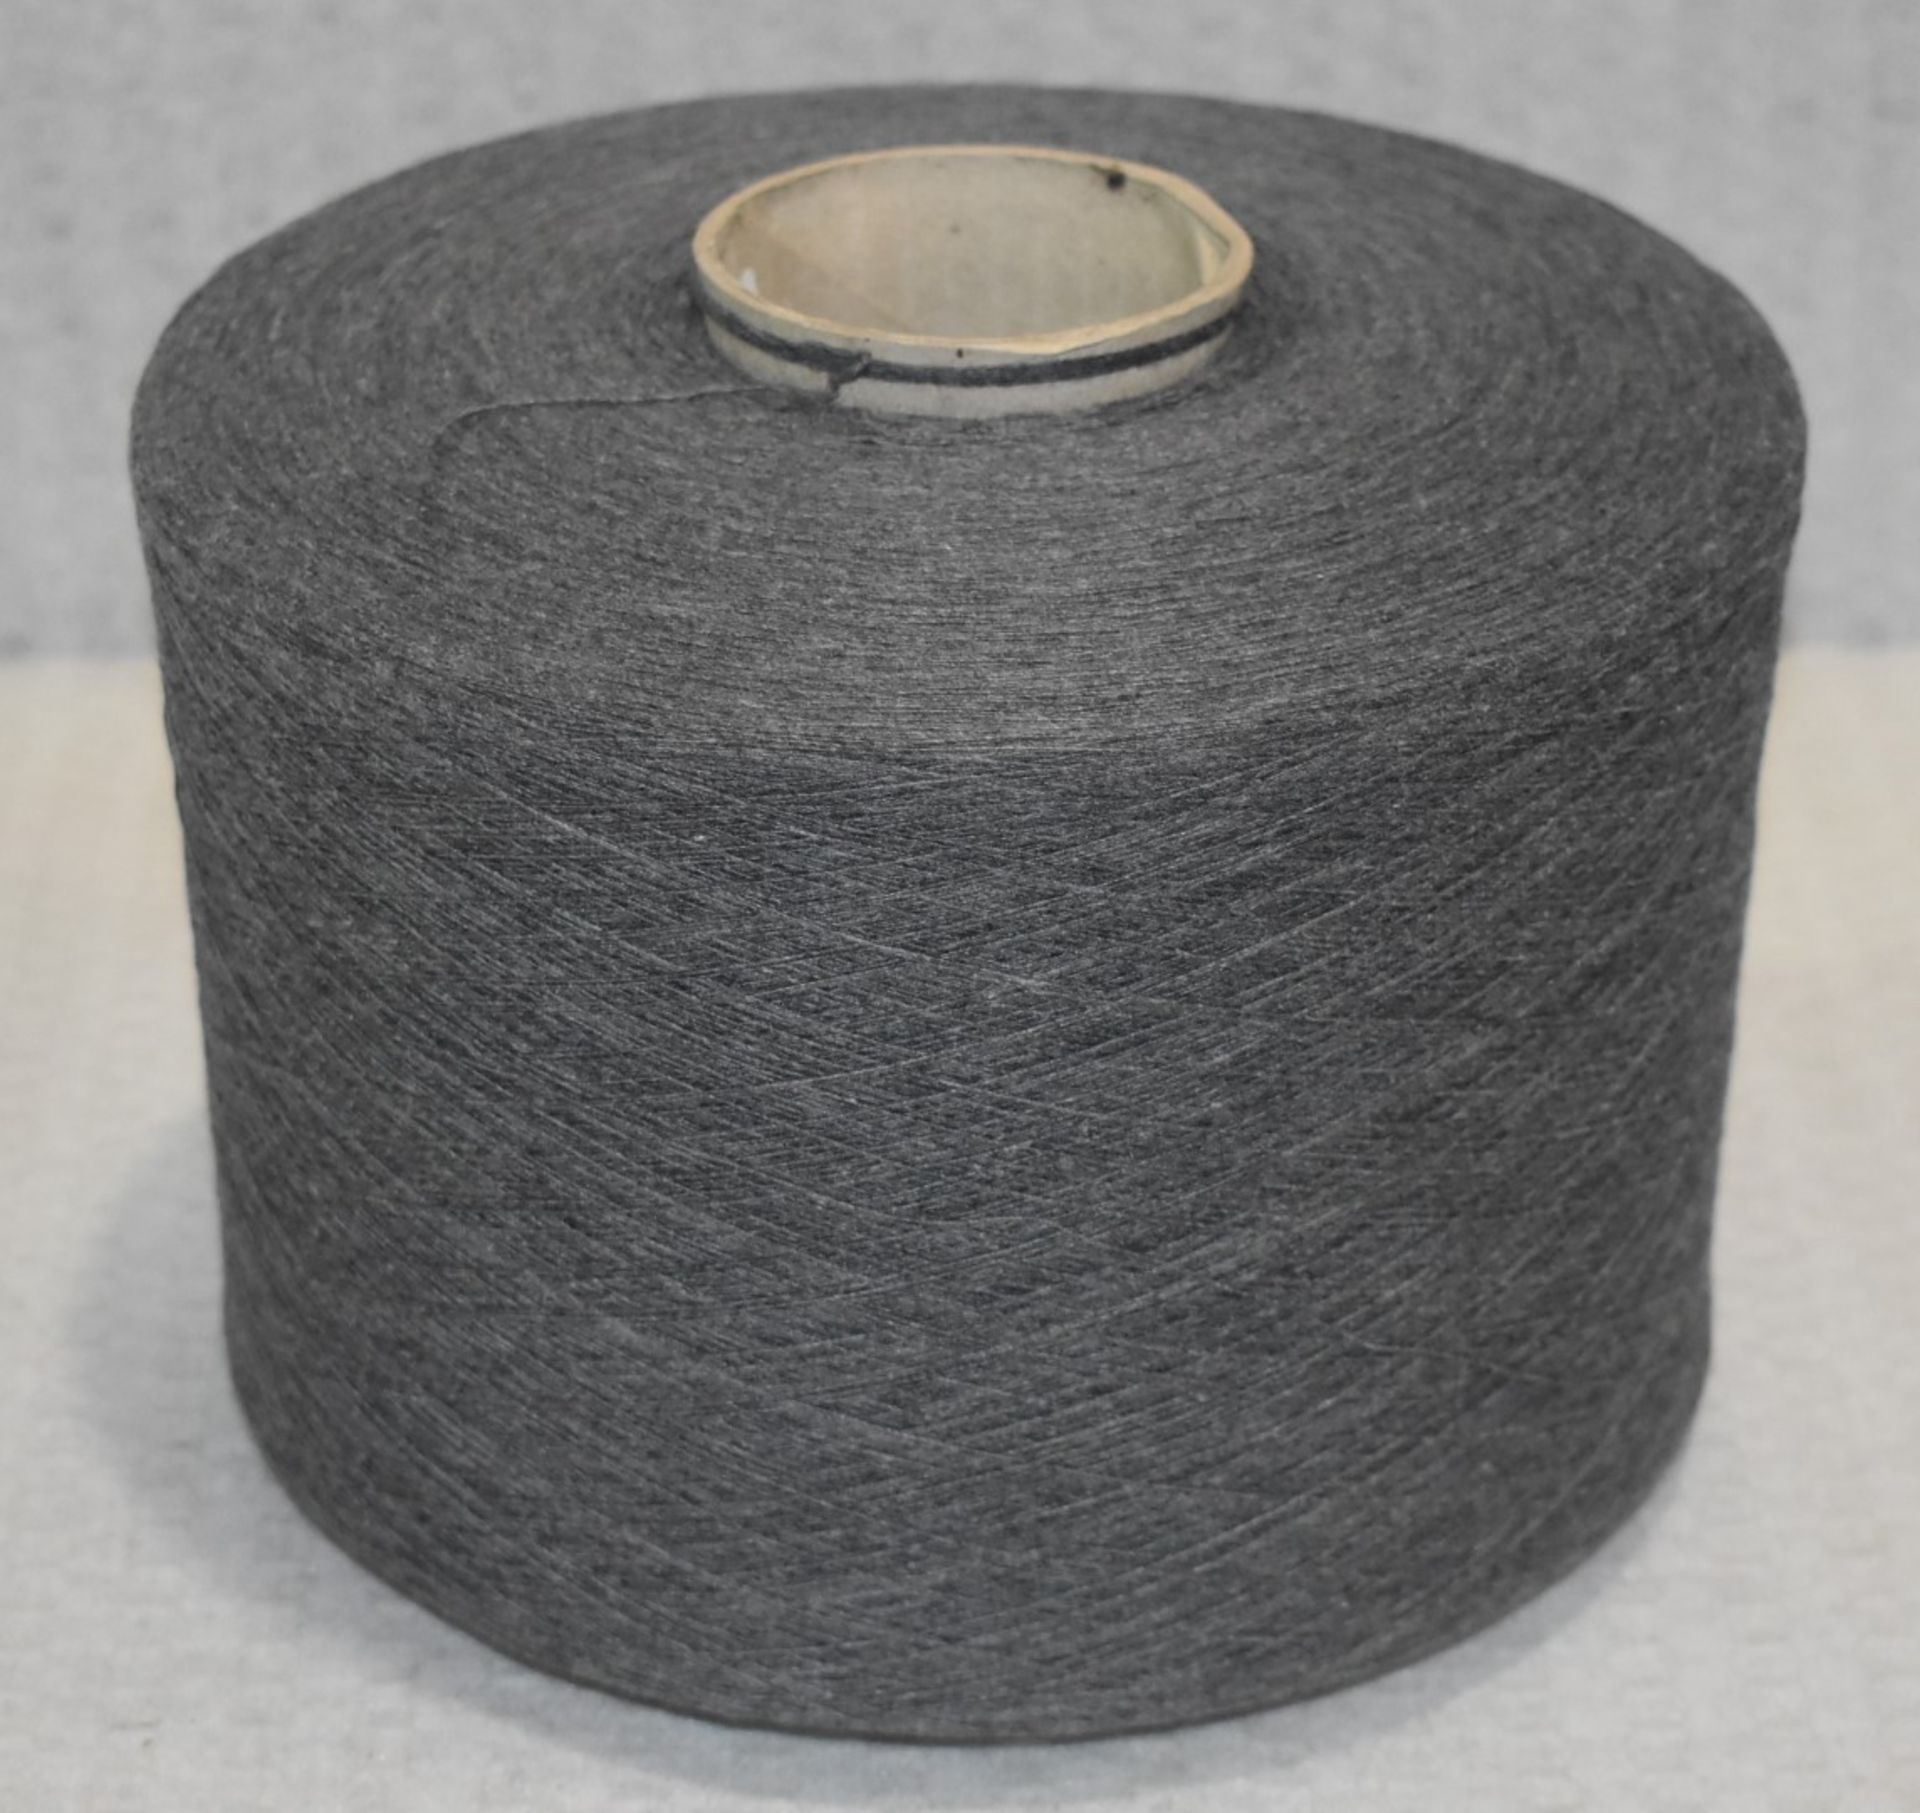 10 x Cones of 1/13 MicroCotton Knitting Yarn - Mid Grey - Approx Weight: 2,500g - New Stock ABL Yarn - Image 14 of 17